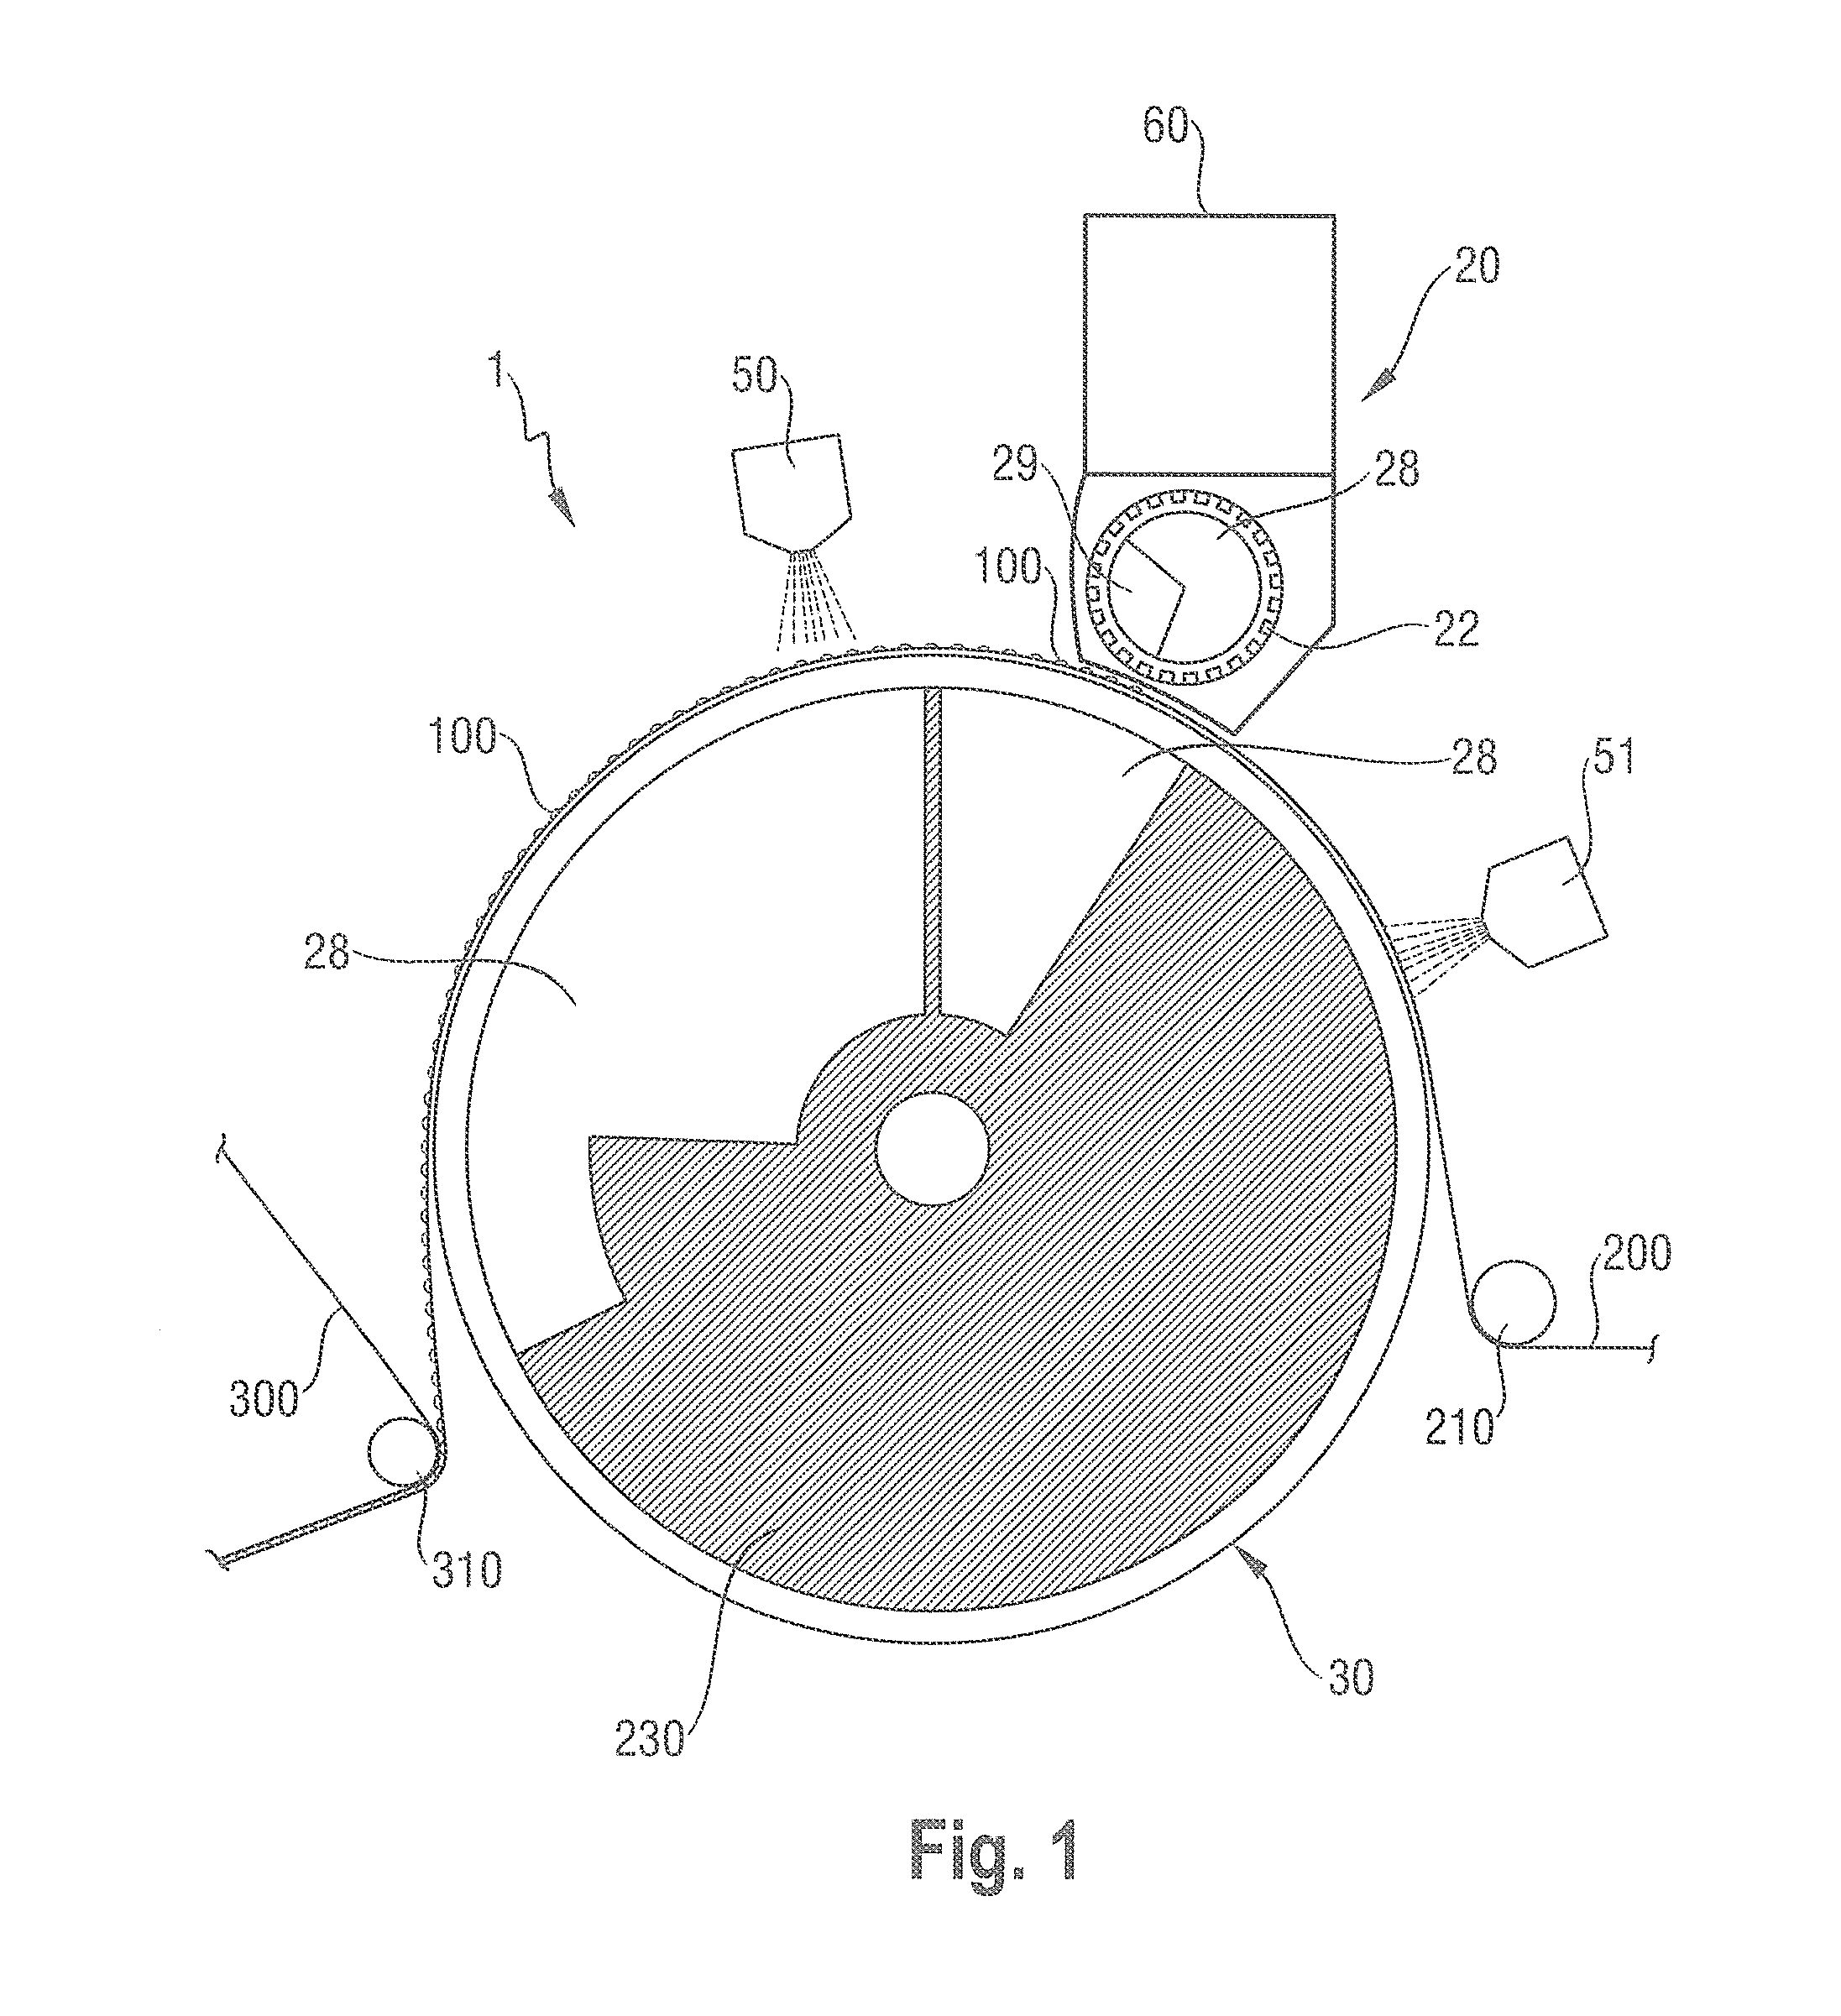 Method and Apparatus for Making Absorbent Structures with Absorbent Material